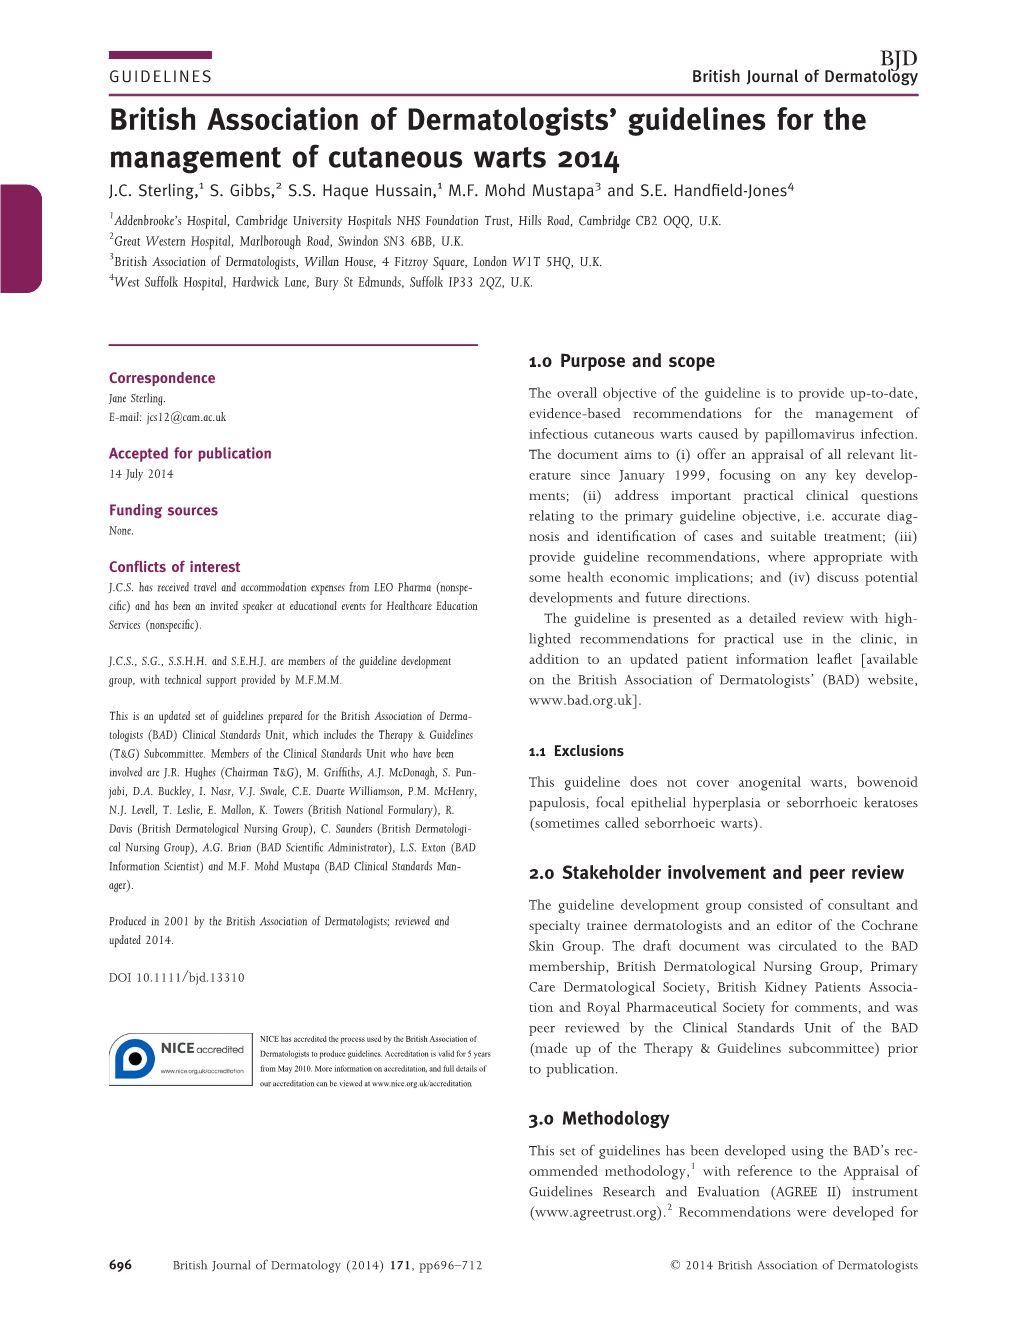 (BAD) Guidelines for Management of Cutaneous Warts 2014